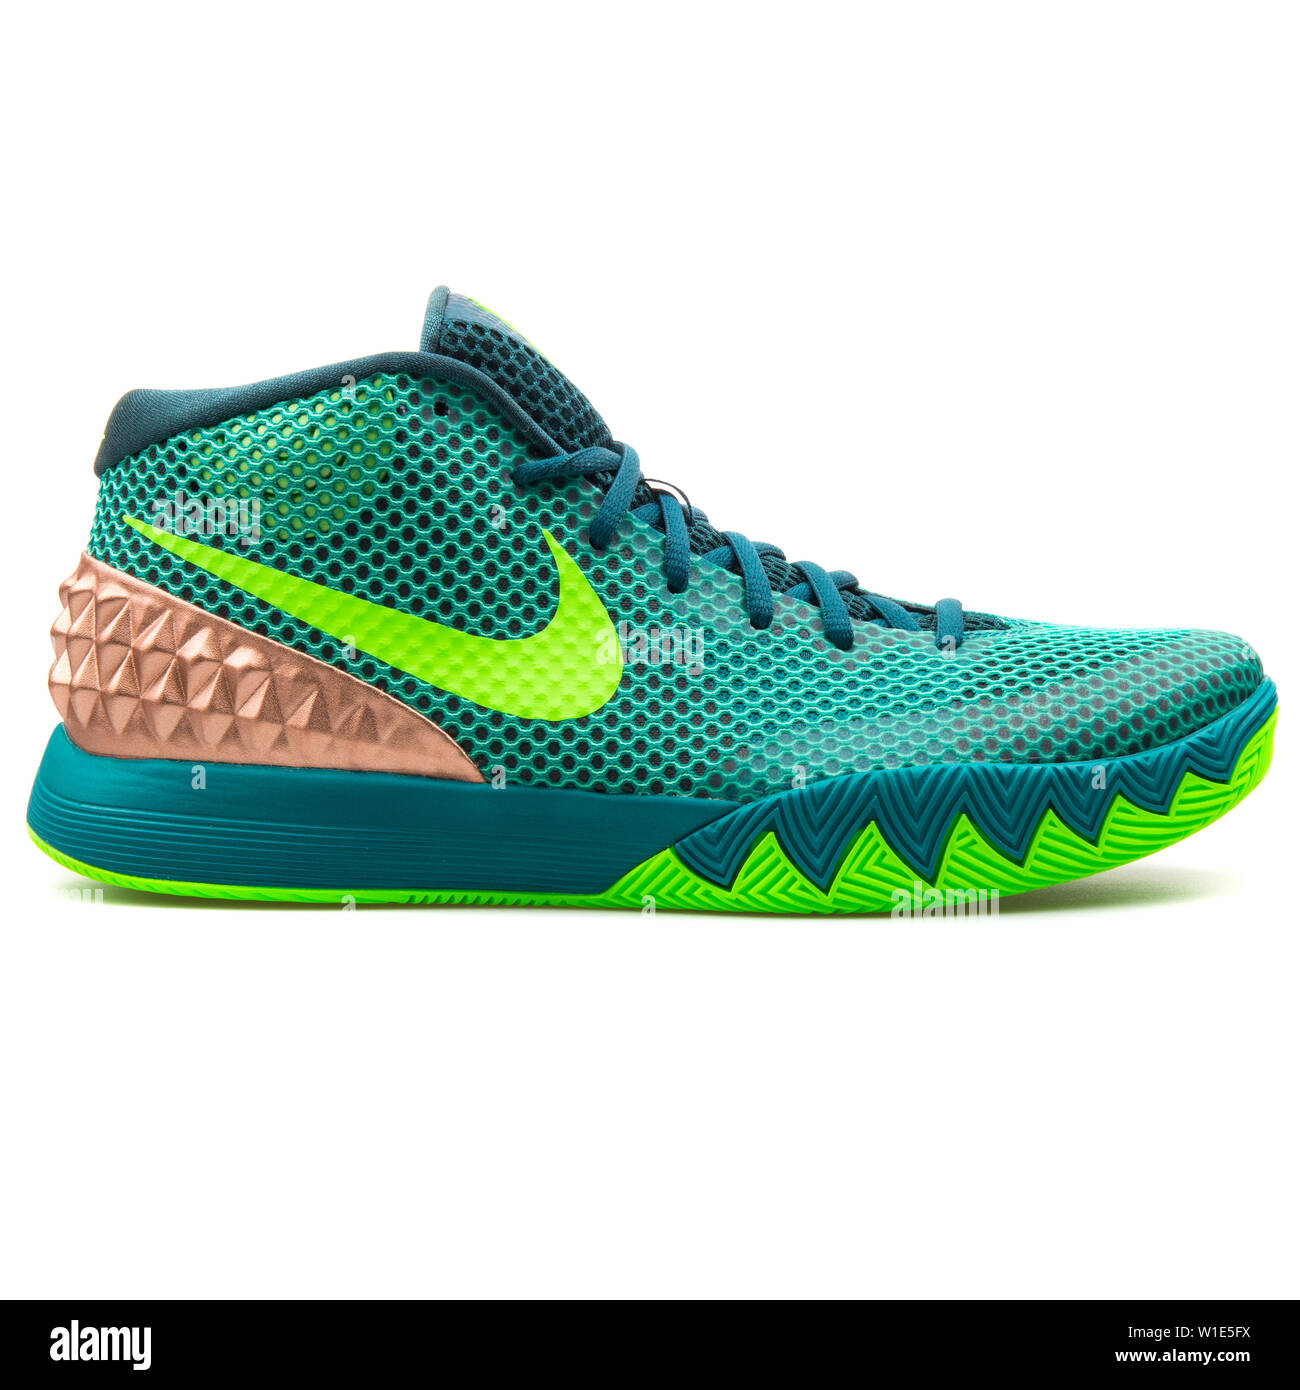 kyrie 1 shoes green